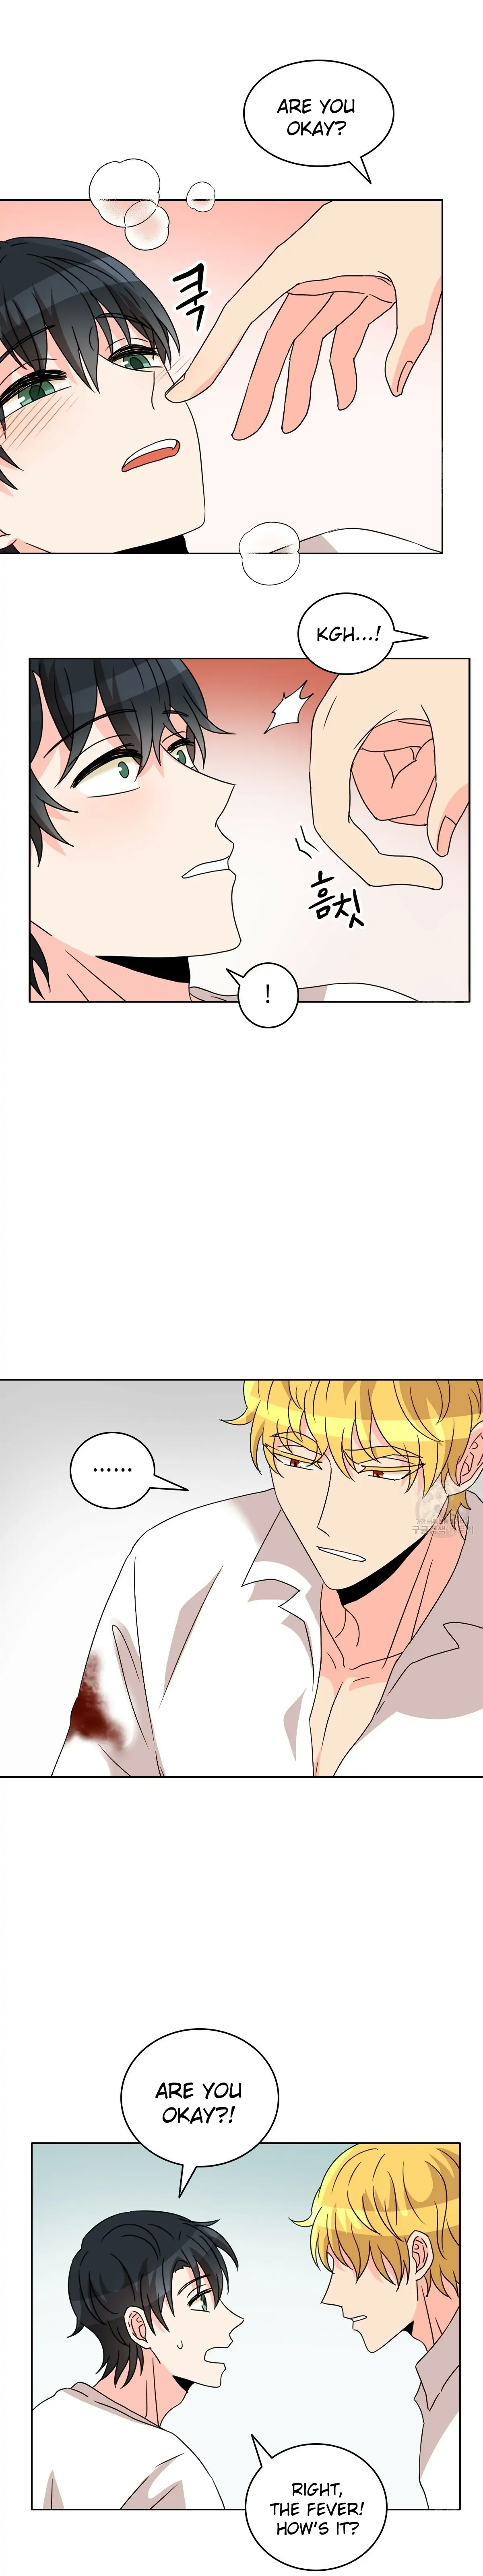 Love Is An Illusion Ch1 Honey? Beast! Ch.10 Page 6 - Mangago